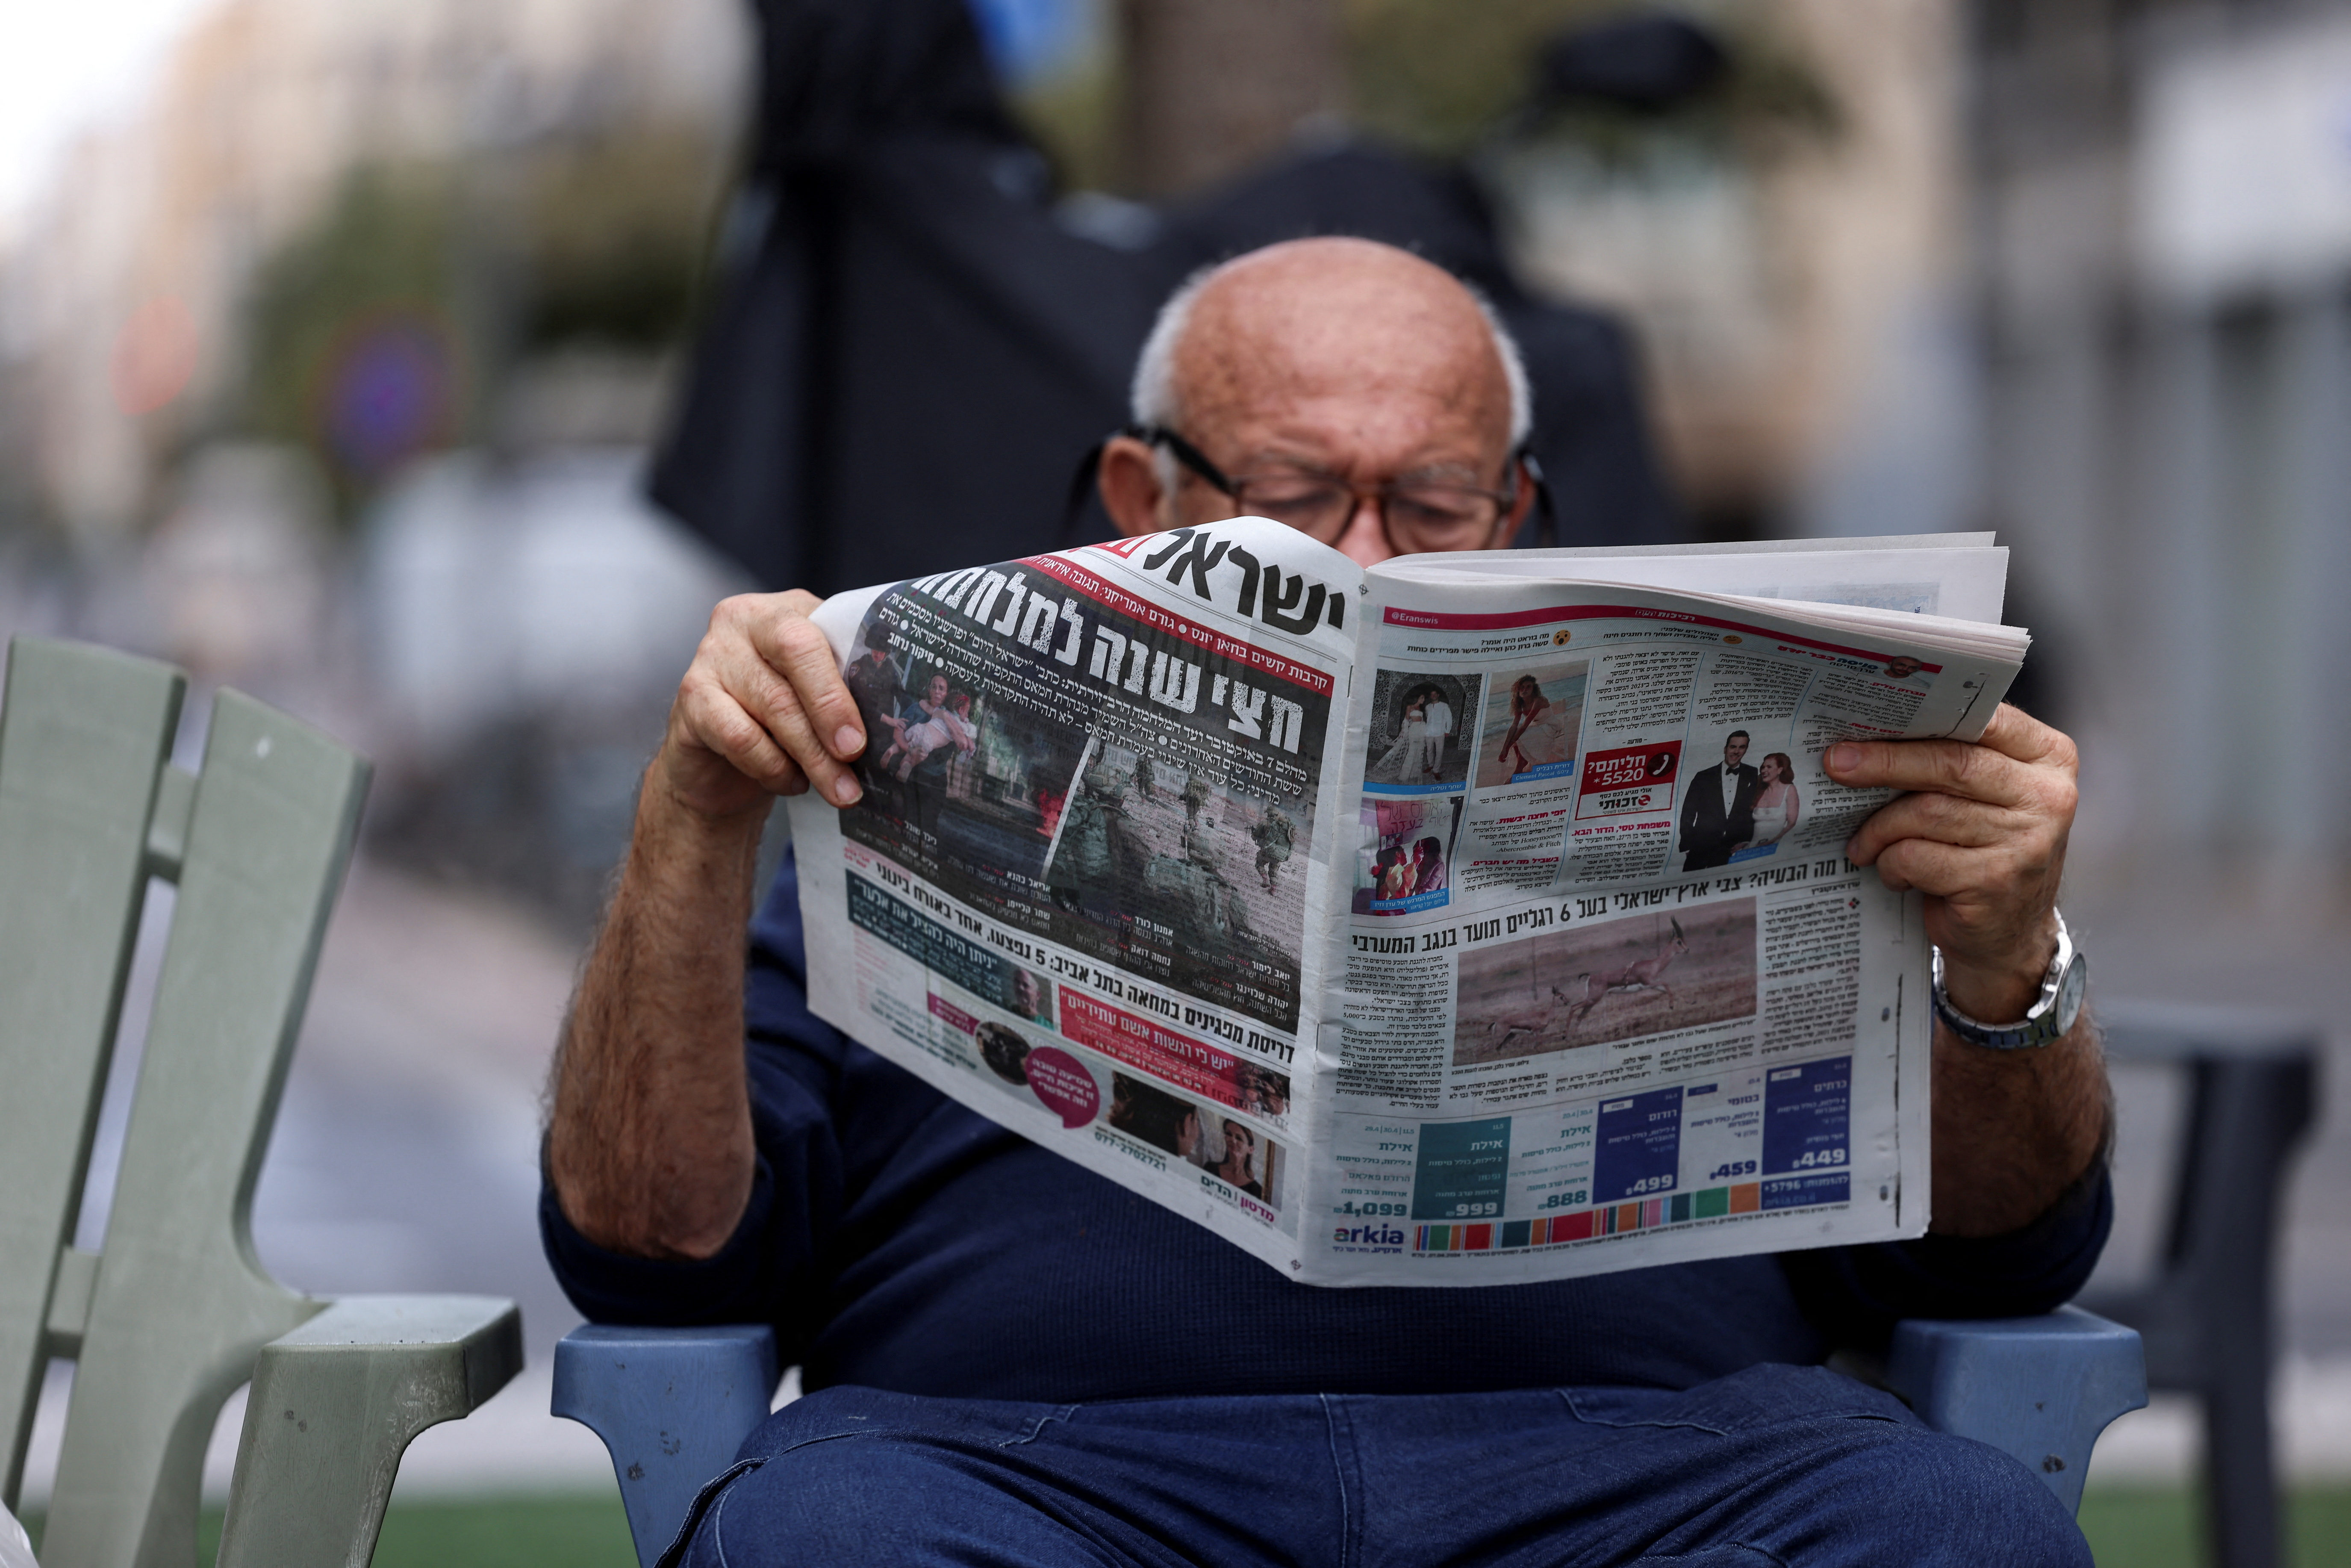 A man reads a newspaper with a headline on a page reading 